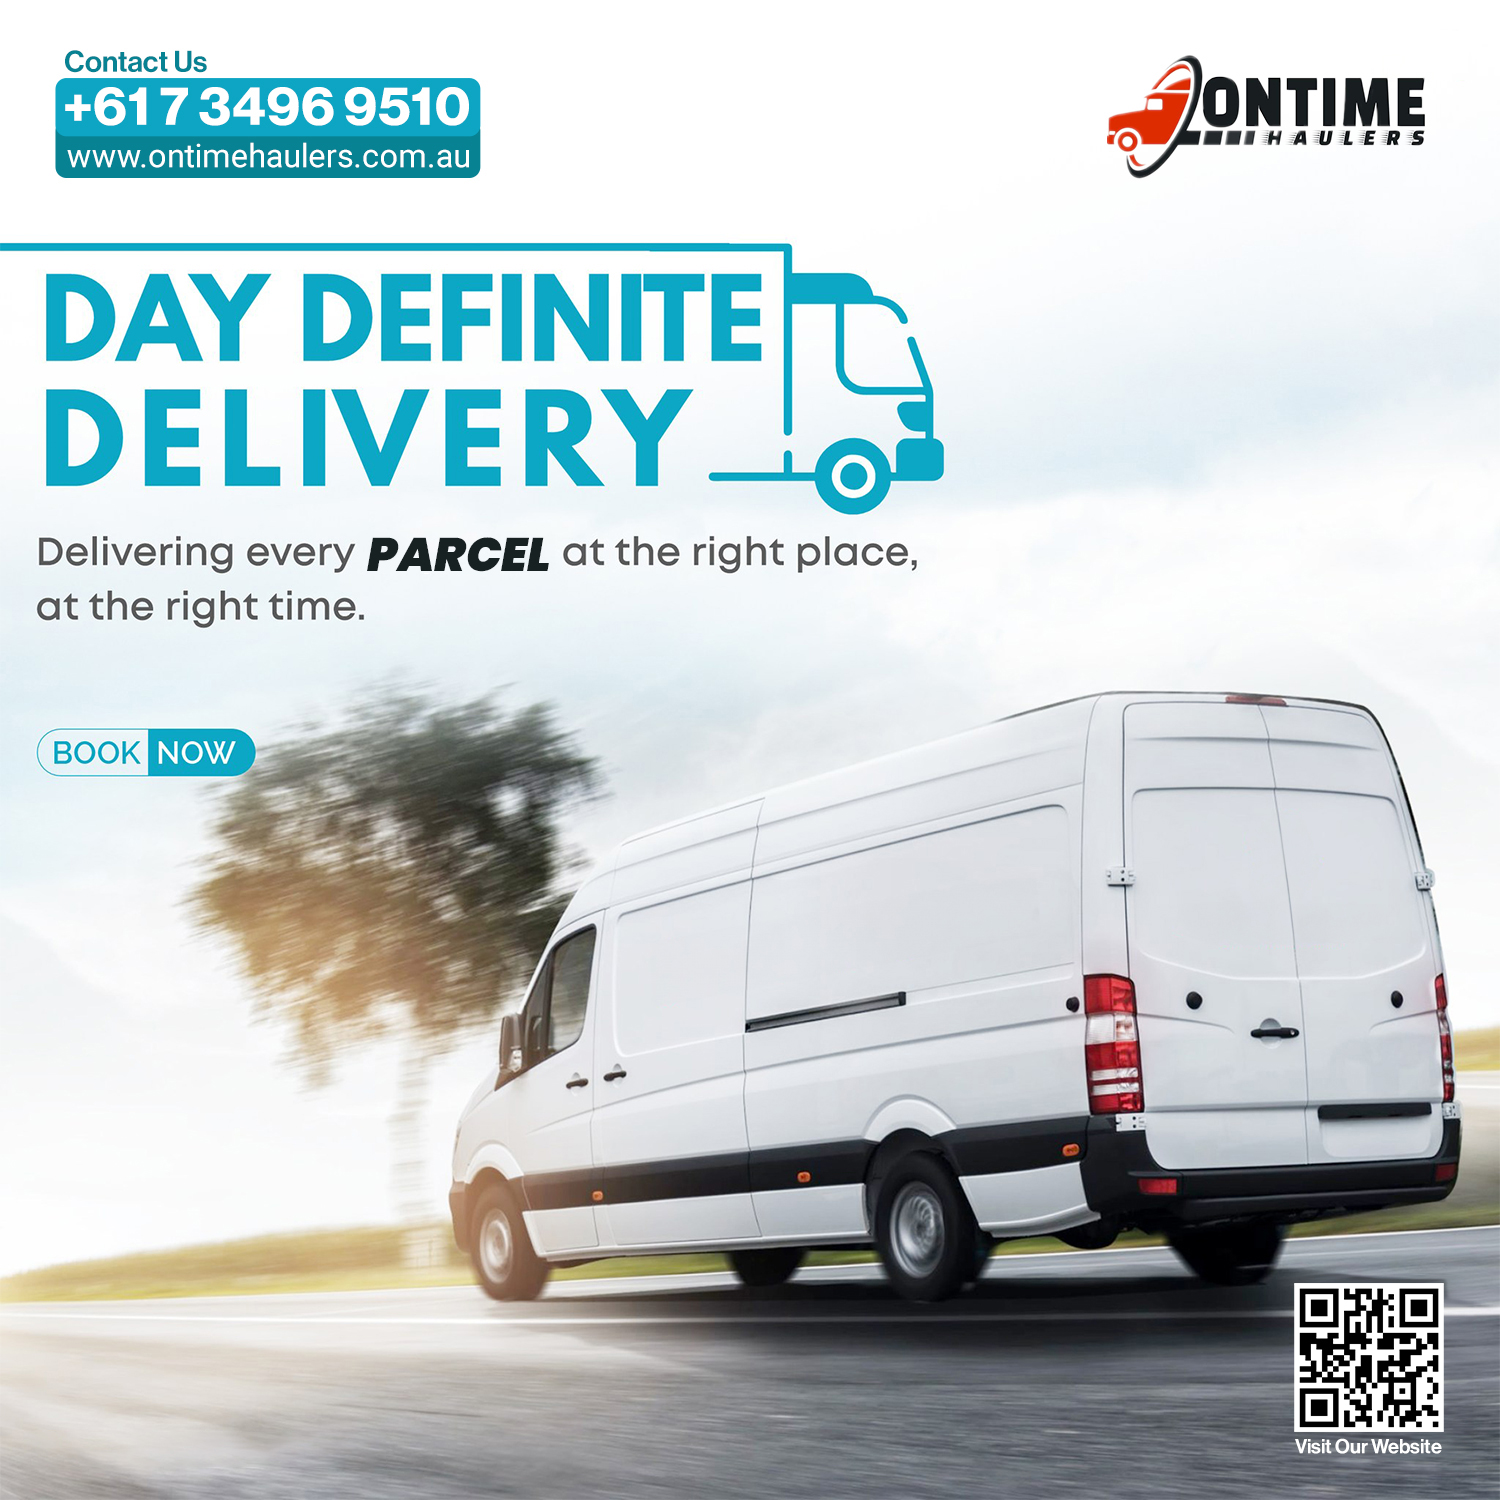 Same Day Delivery Courier Brisbane | Best Courier Company in Brisbane